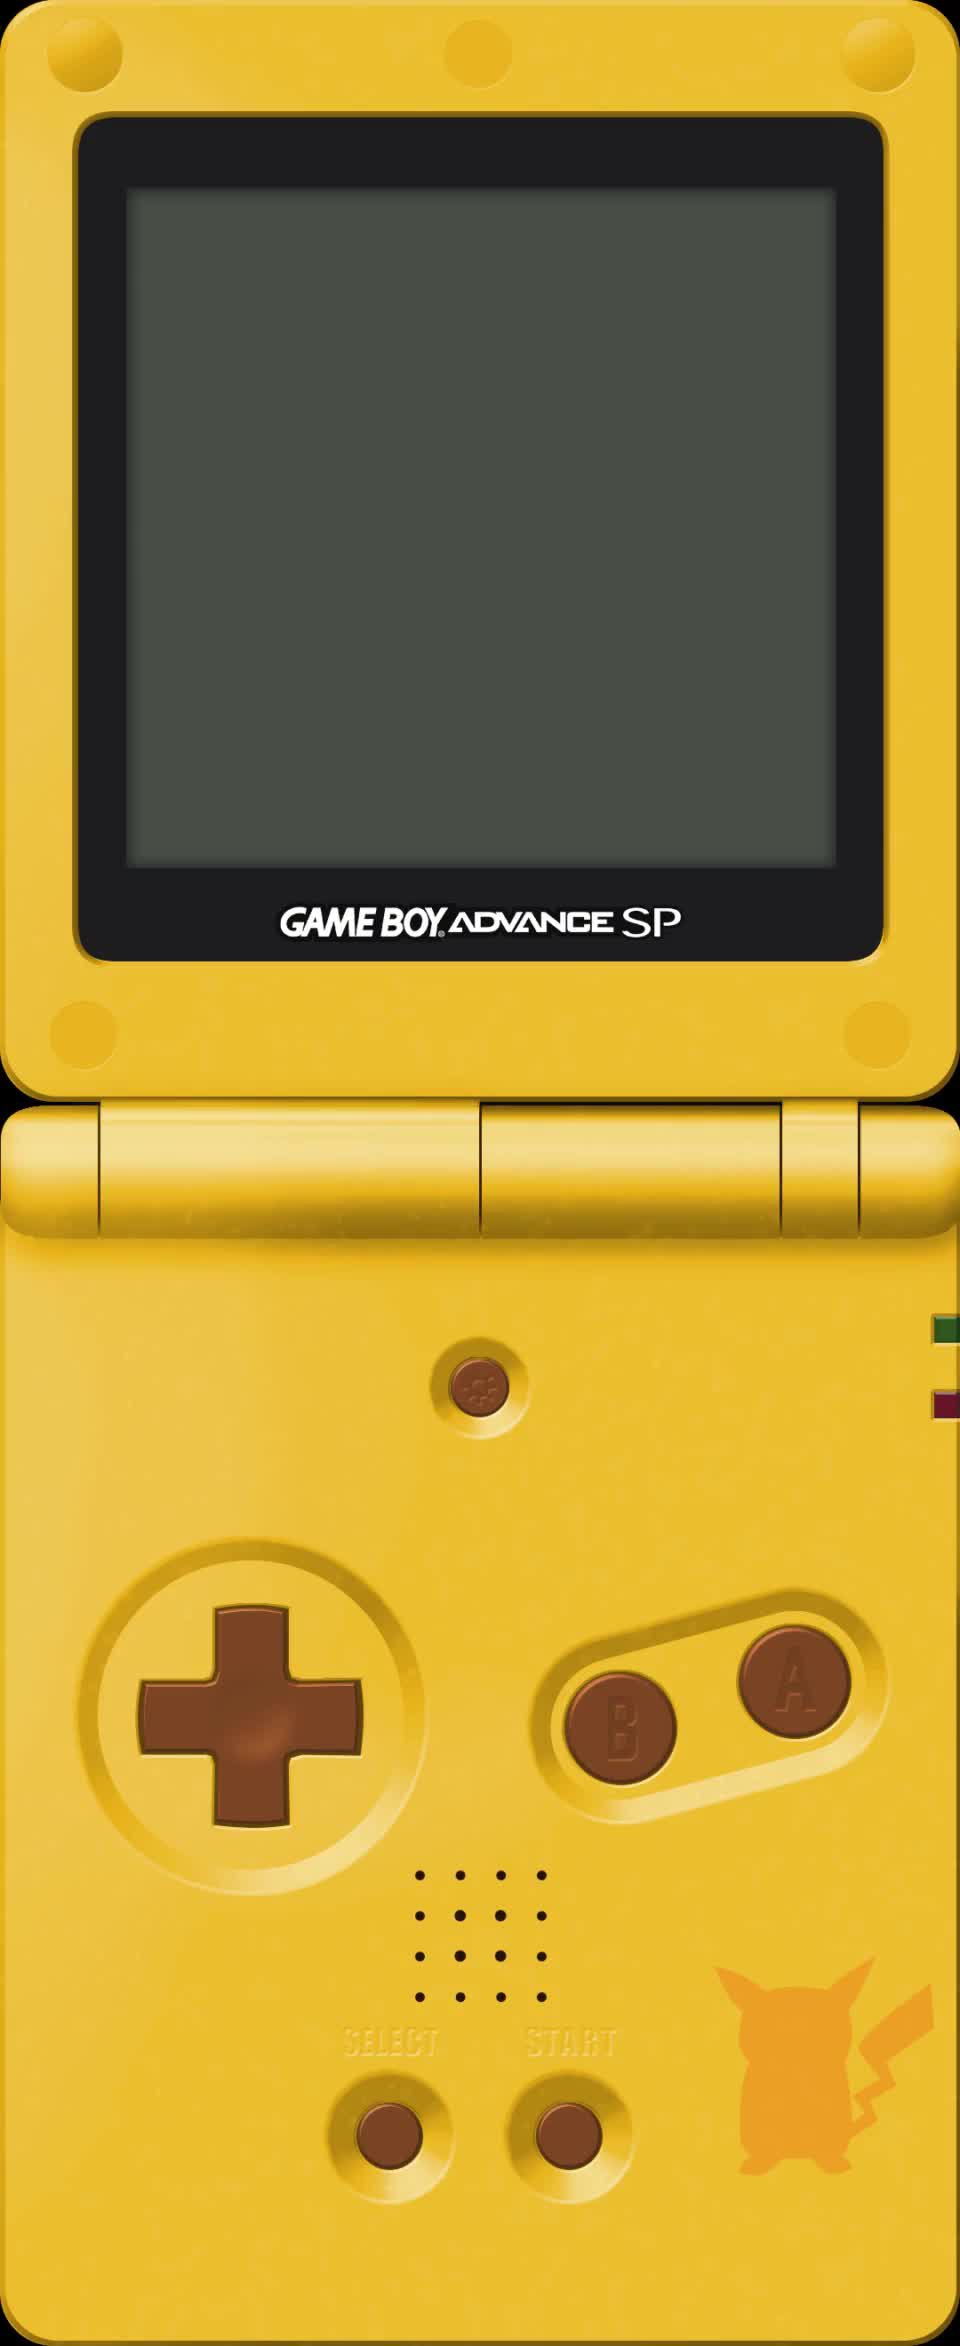 Made Some GBA Pokemon Video Background, Ty U Rayjt9 For The GBA Wallpaper!